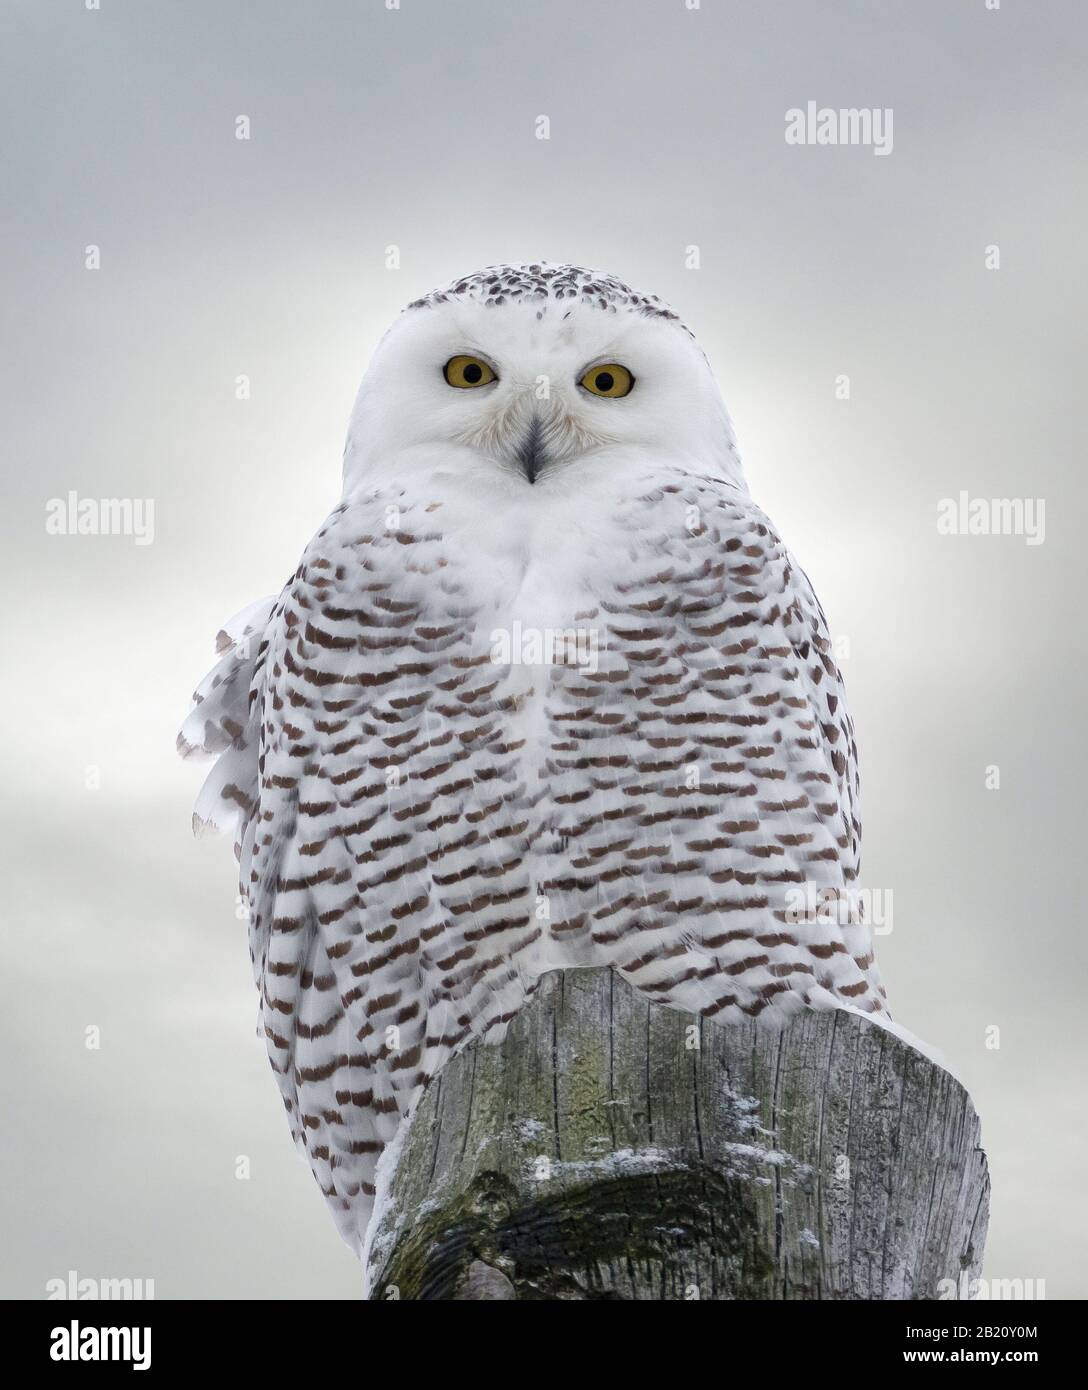 Close up of Snowy Owl perched on wooden post Stock Photo